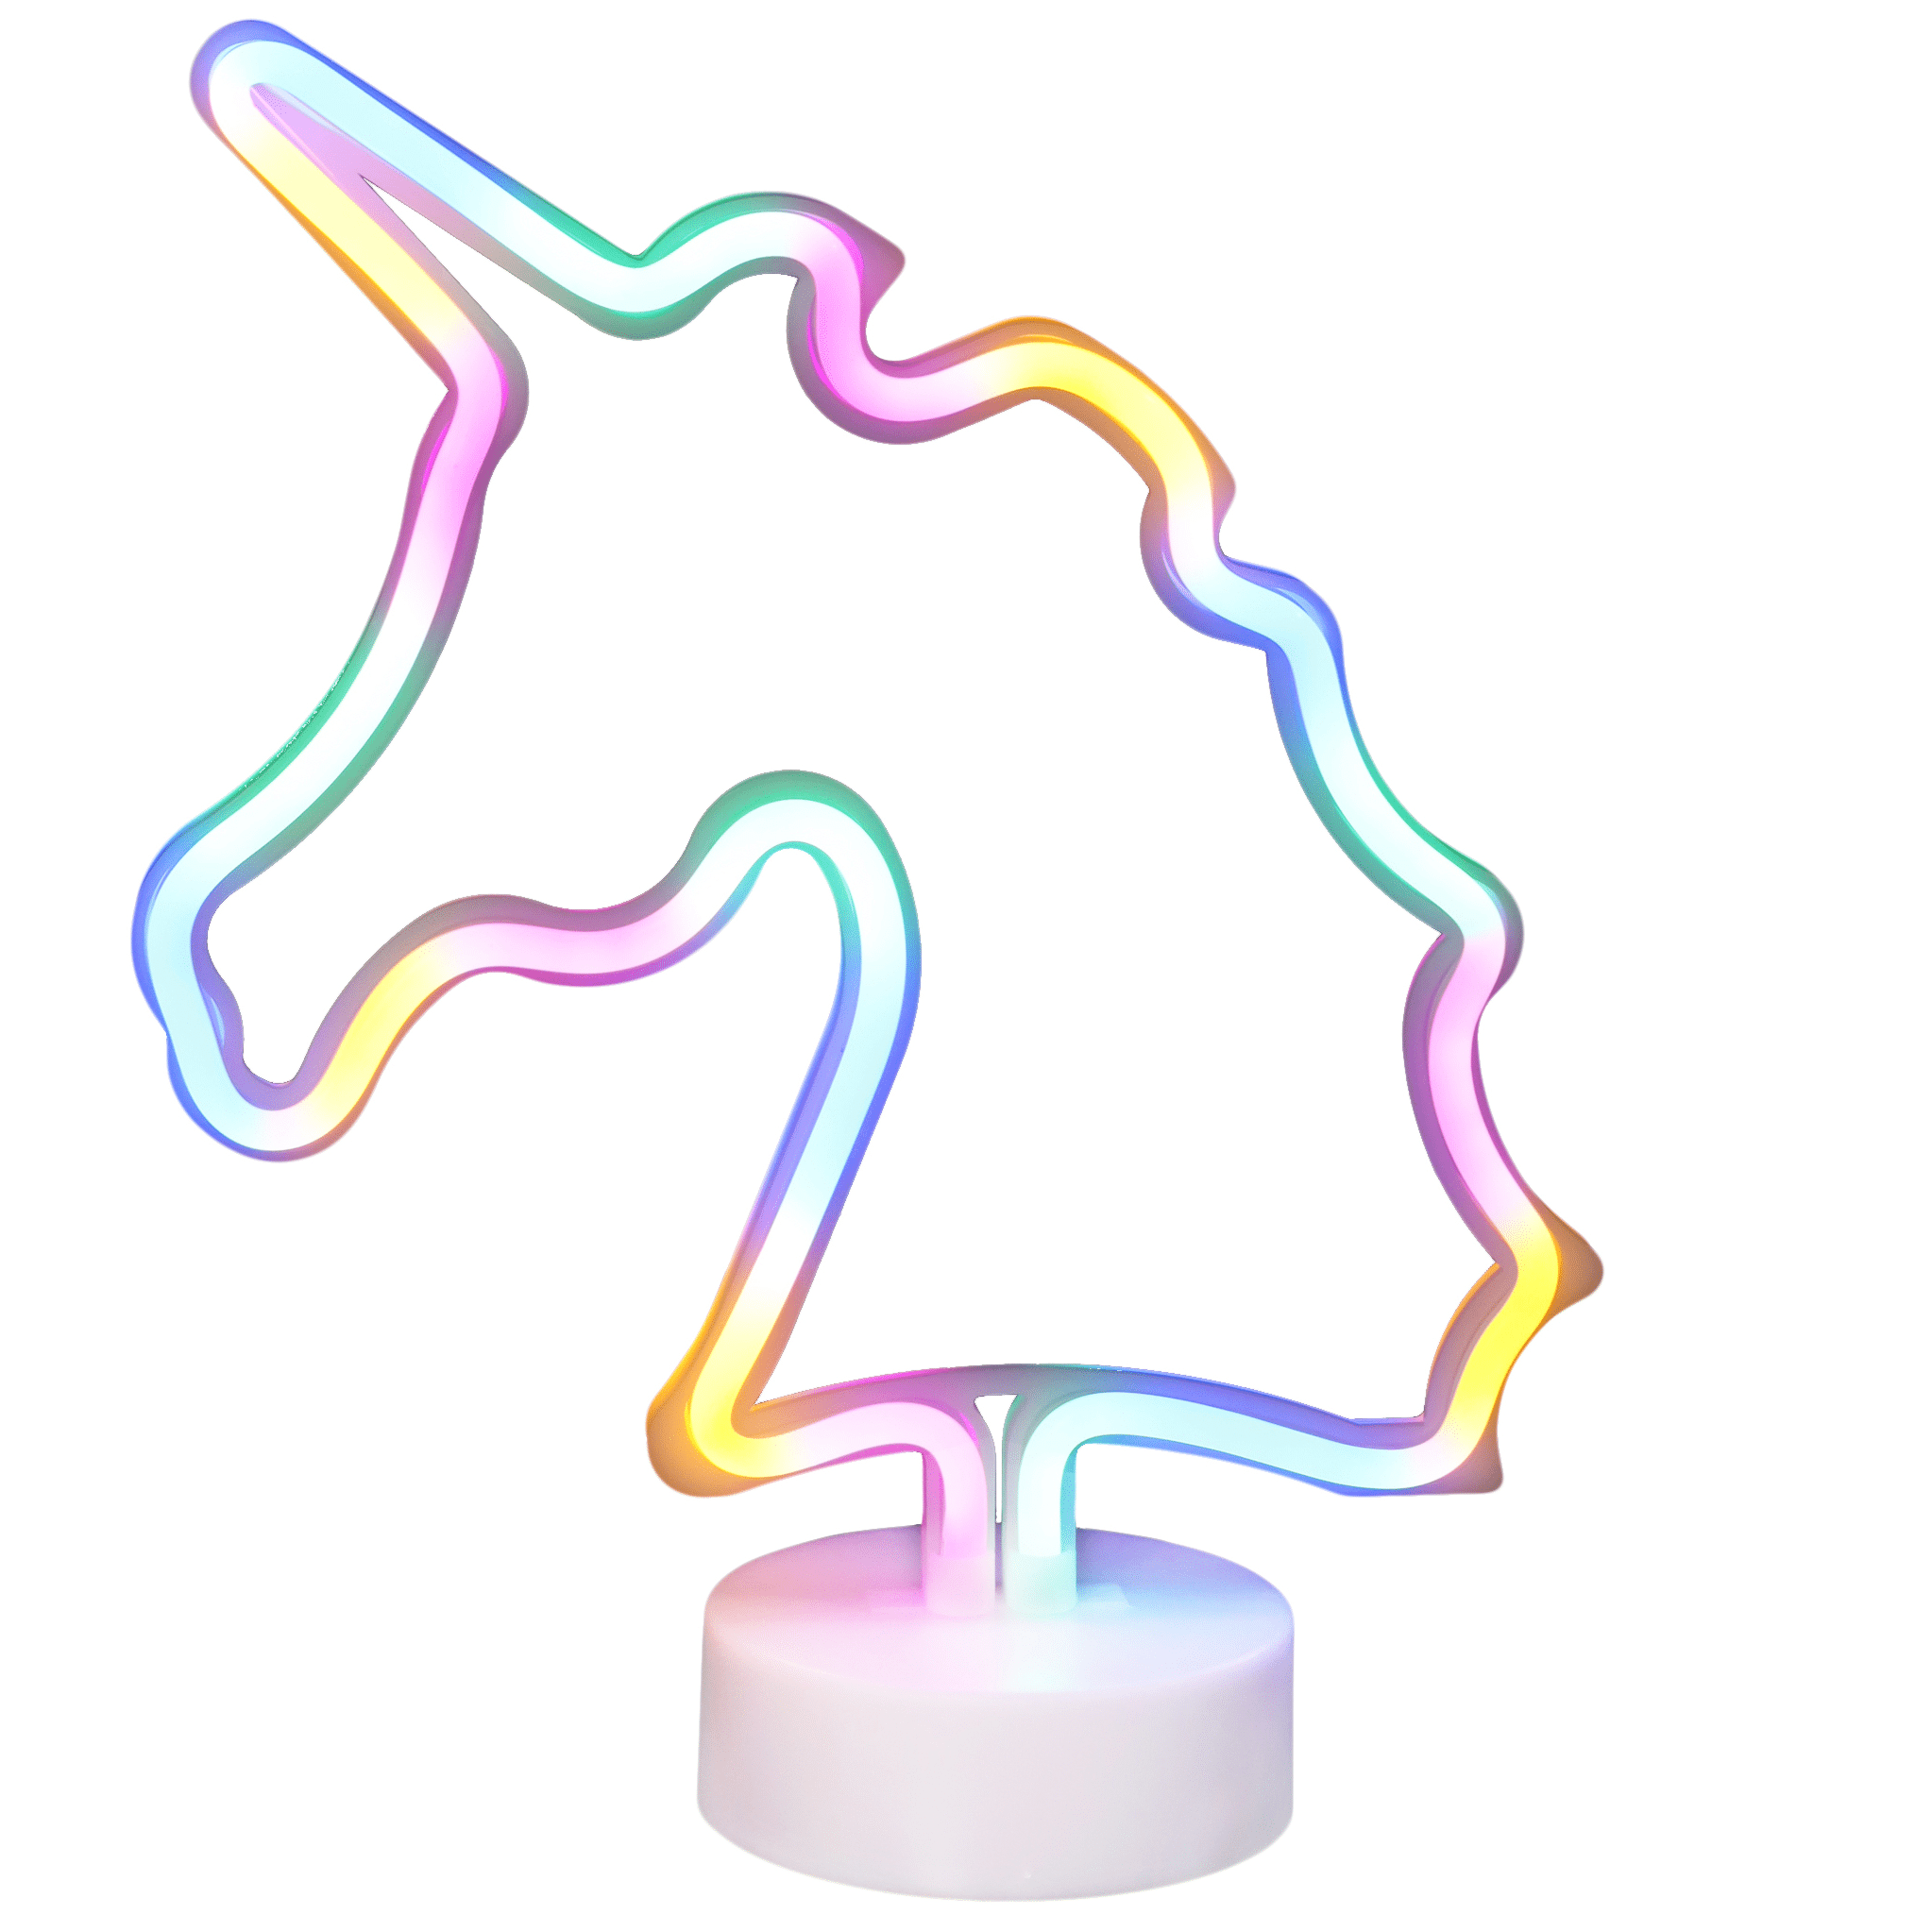 Built-in Multicolor Timer Battery Unicorn LED with Light, Operated EZ-Illuminations Neon-Style